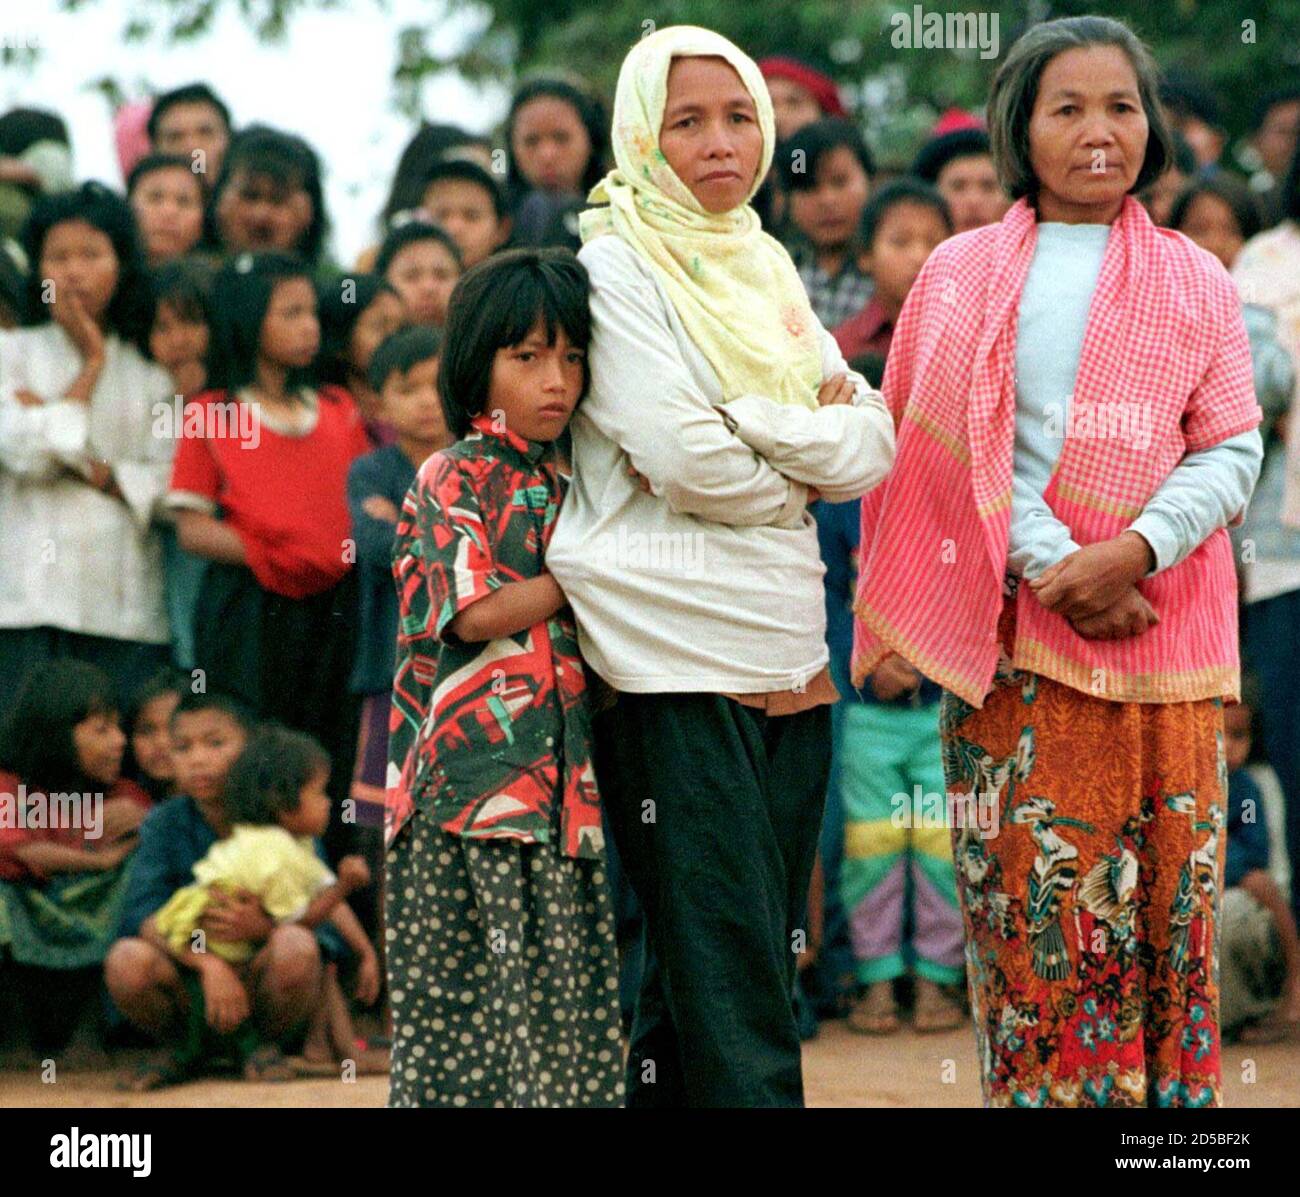 Mea Son (R), widow of the late Khmer Rouge leader Pol Pot,  watches fellow Cambodian refugees leaving Phu Noi refugee camp at the Thai-Cambodian border, 500 km north east of Bangkok January 12. The child at left has been identified by the Thai military as the teenaged daughter of the reviled dictator. The woman in the centre is unidentified. About 400 refugees, the first group of Khmer Rouge dependents,  returned to Cambodia [after their leaders Khieu Samphan and Nuon Chea defected to the Phnom Penh government last month.] Stock Photo